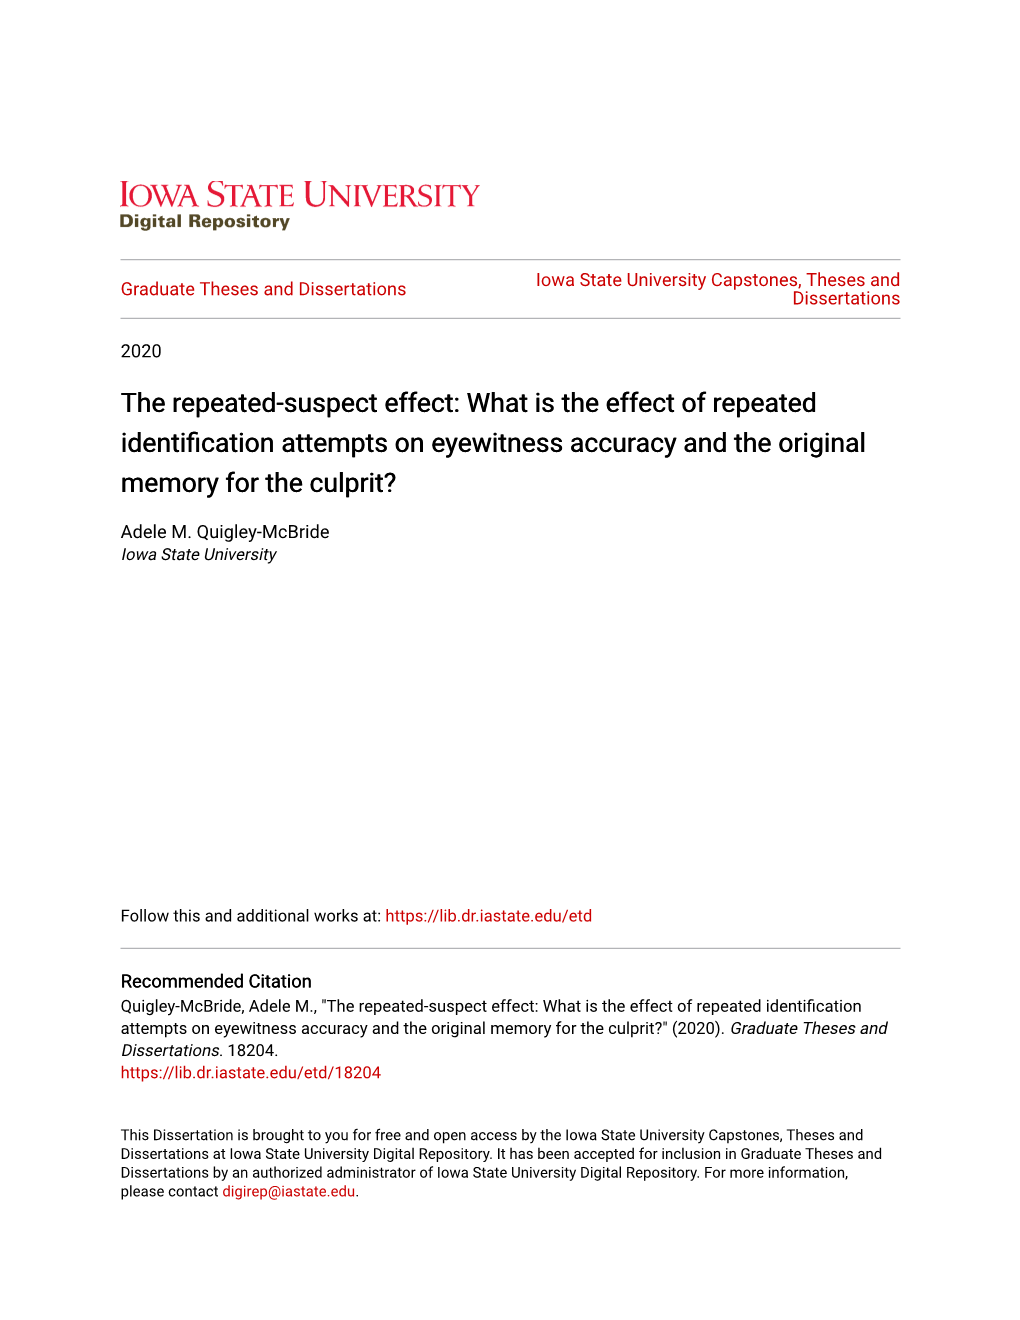 The Repeated-Suspect Effect: What Is the Effect of Repeated Identification Attempts on Eyewitness Accuracy and the Original Memory for the Culprit?" (2020)